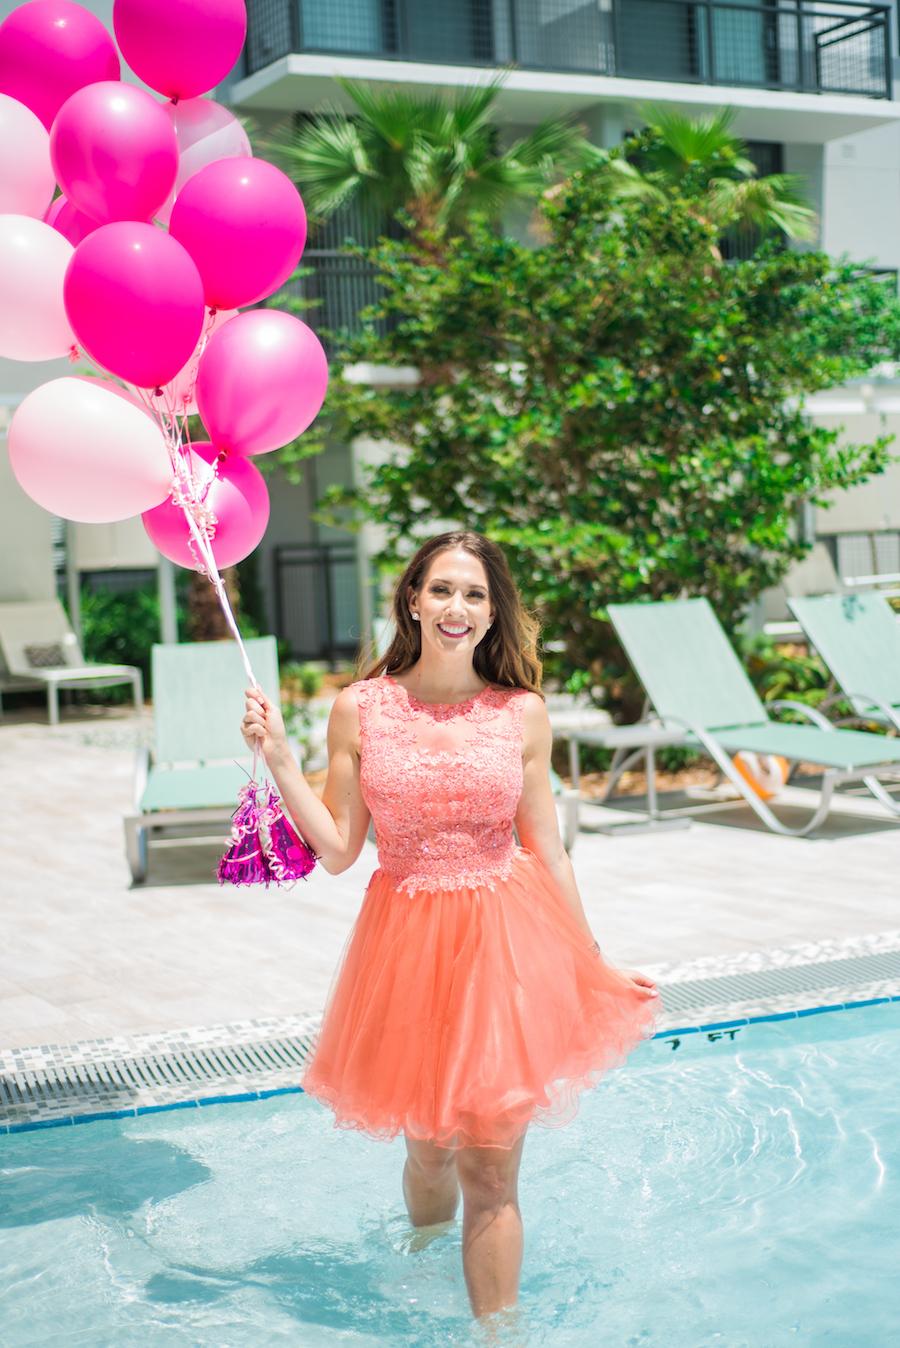 Pink Birthday Party Dress from Lending Luxury with Balloons | Modern Colorful Birthday Party Inspiration and Decor | Tampa Bay Portrait and Wedding Photographer Kera Photography